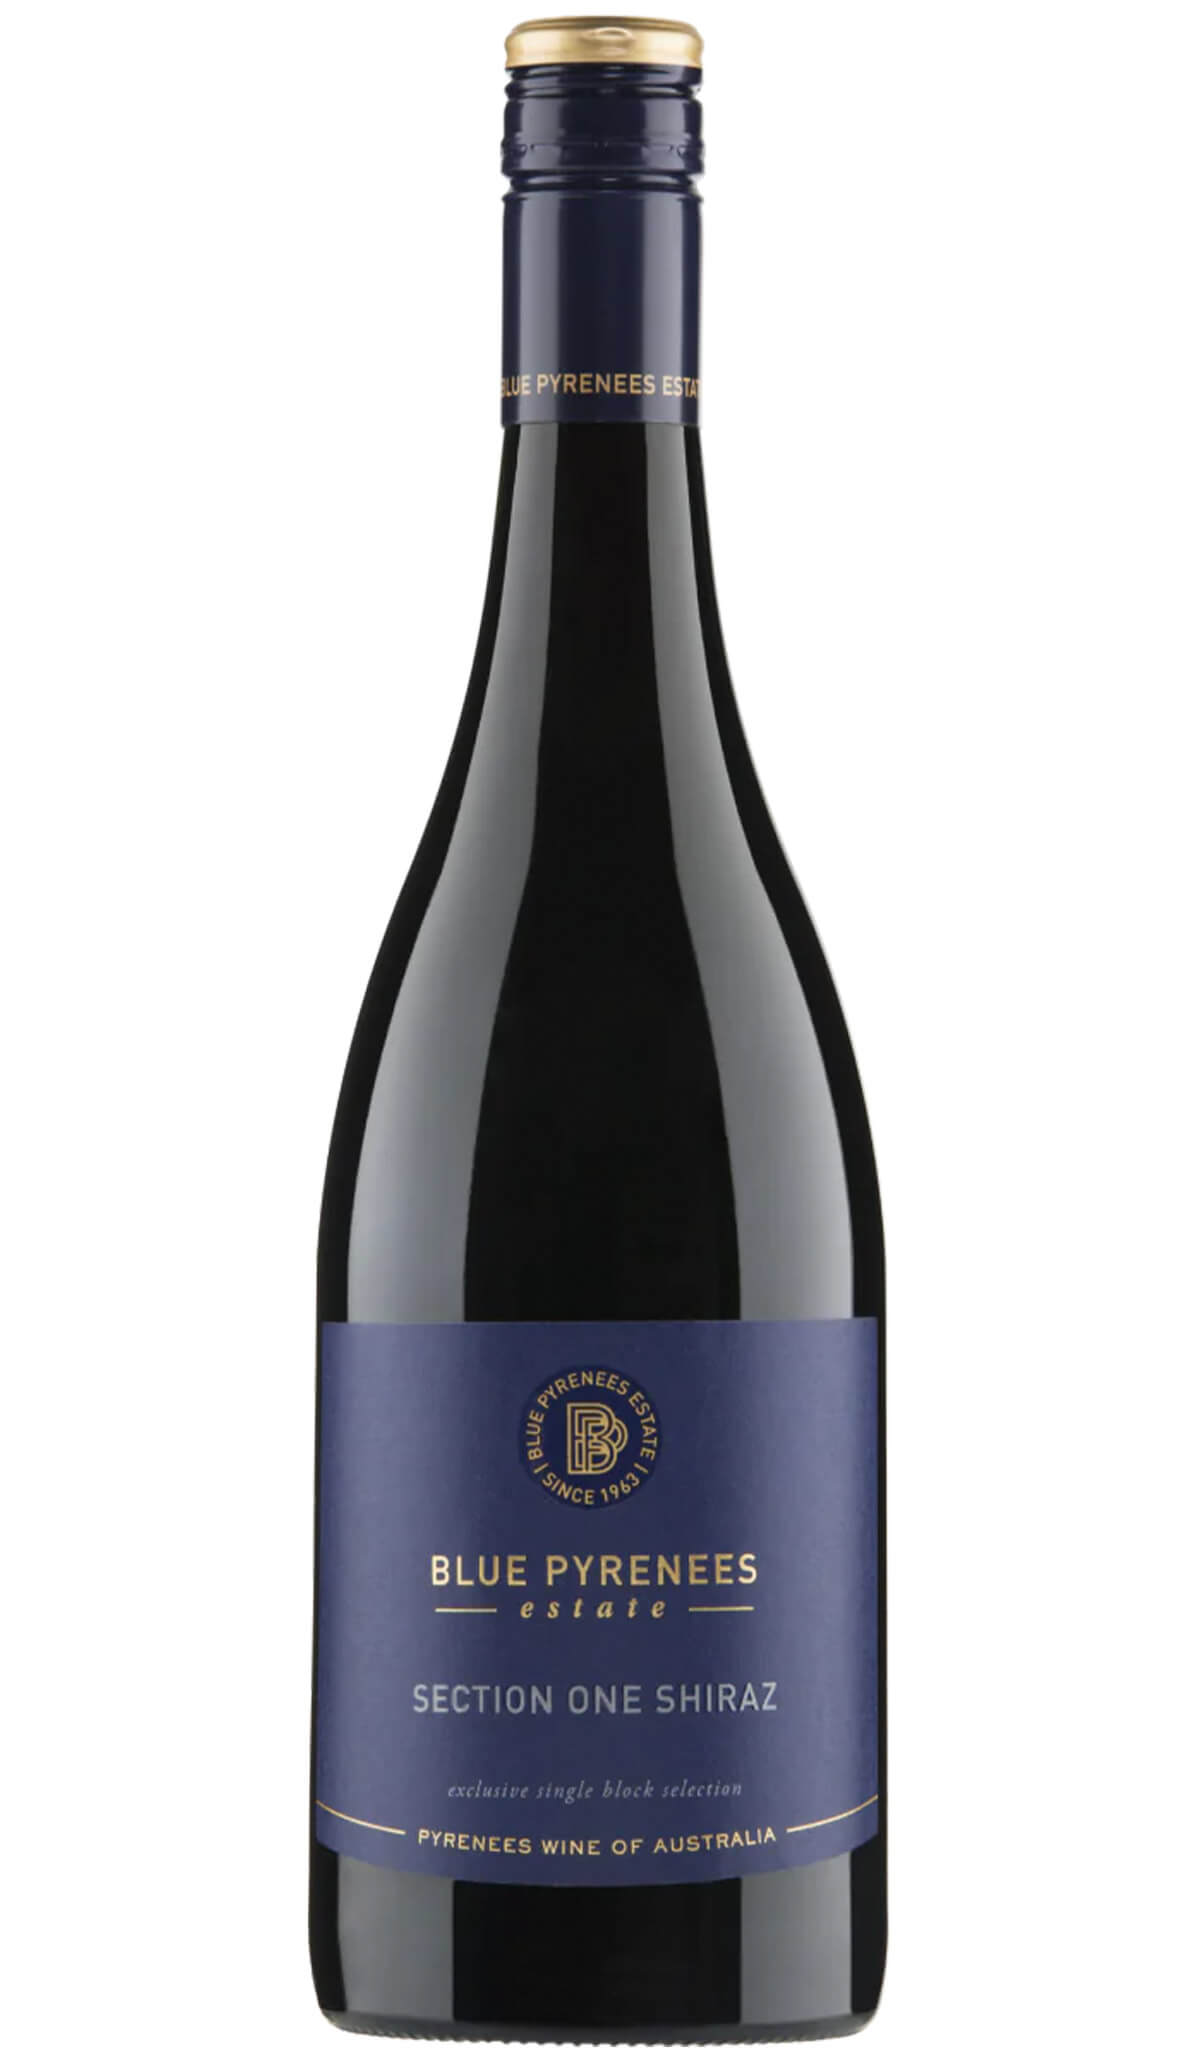 Find out more, explore the range and buy Blue Pyrenees Estate Section One Shiraz 2019 available online at Wine Sellers Direct - Australia's independent liquor specialists.